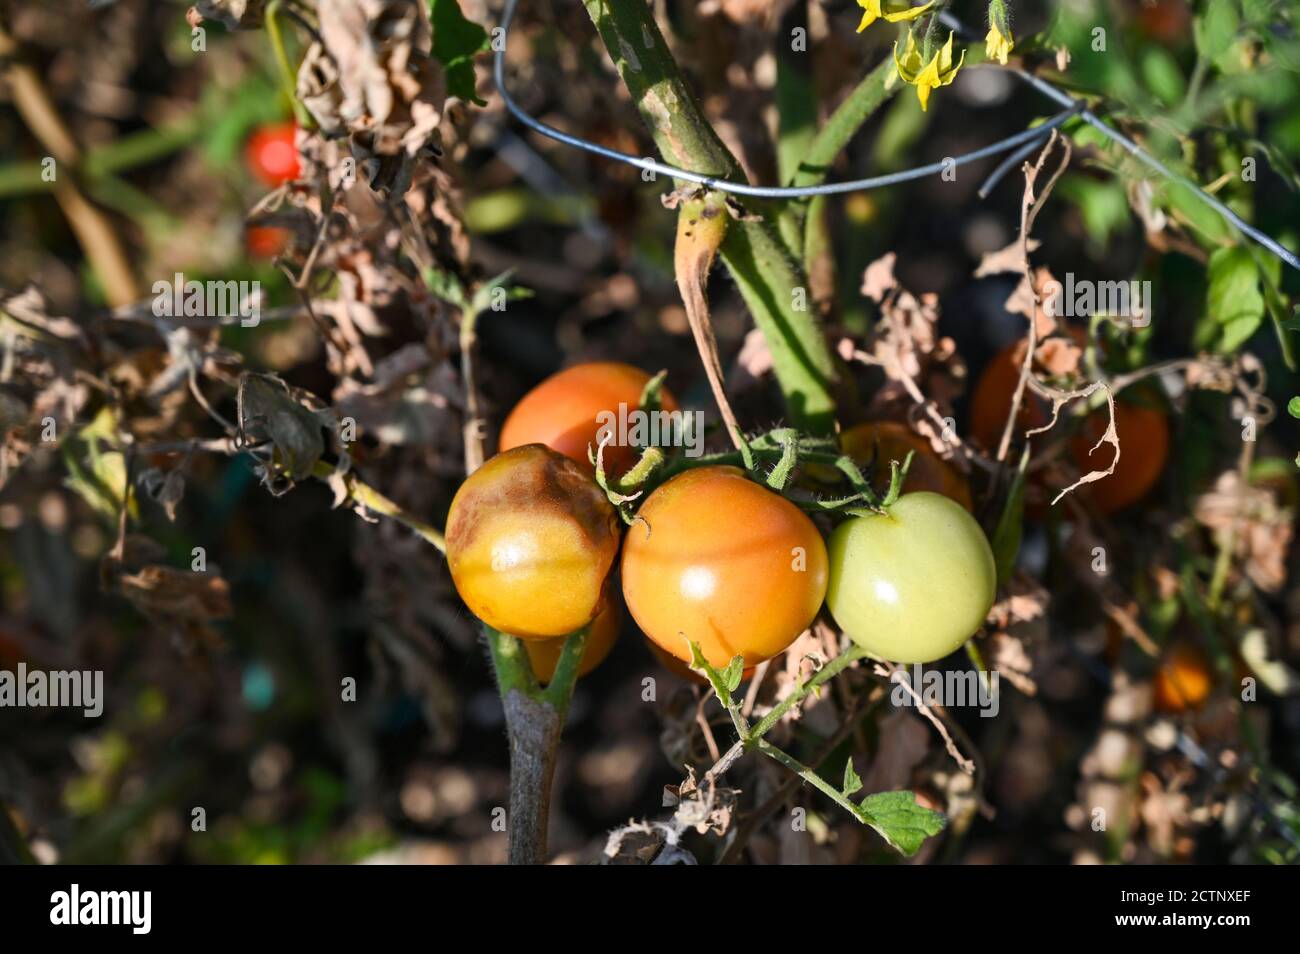 Tomatoes grown outdoors suffering tomato blight - Tomato blight is a disease caused by a fungus-like organism that spreads rapidly in the foliage Stock Photo